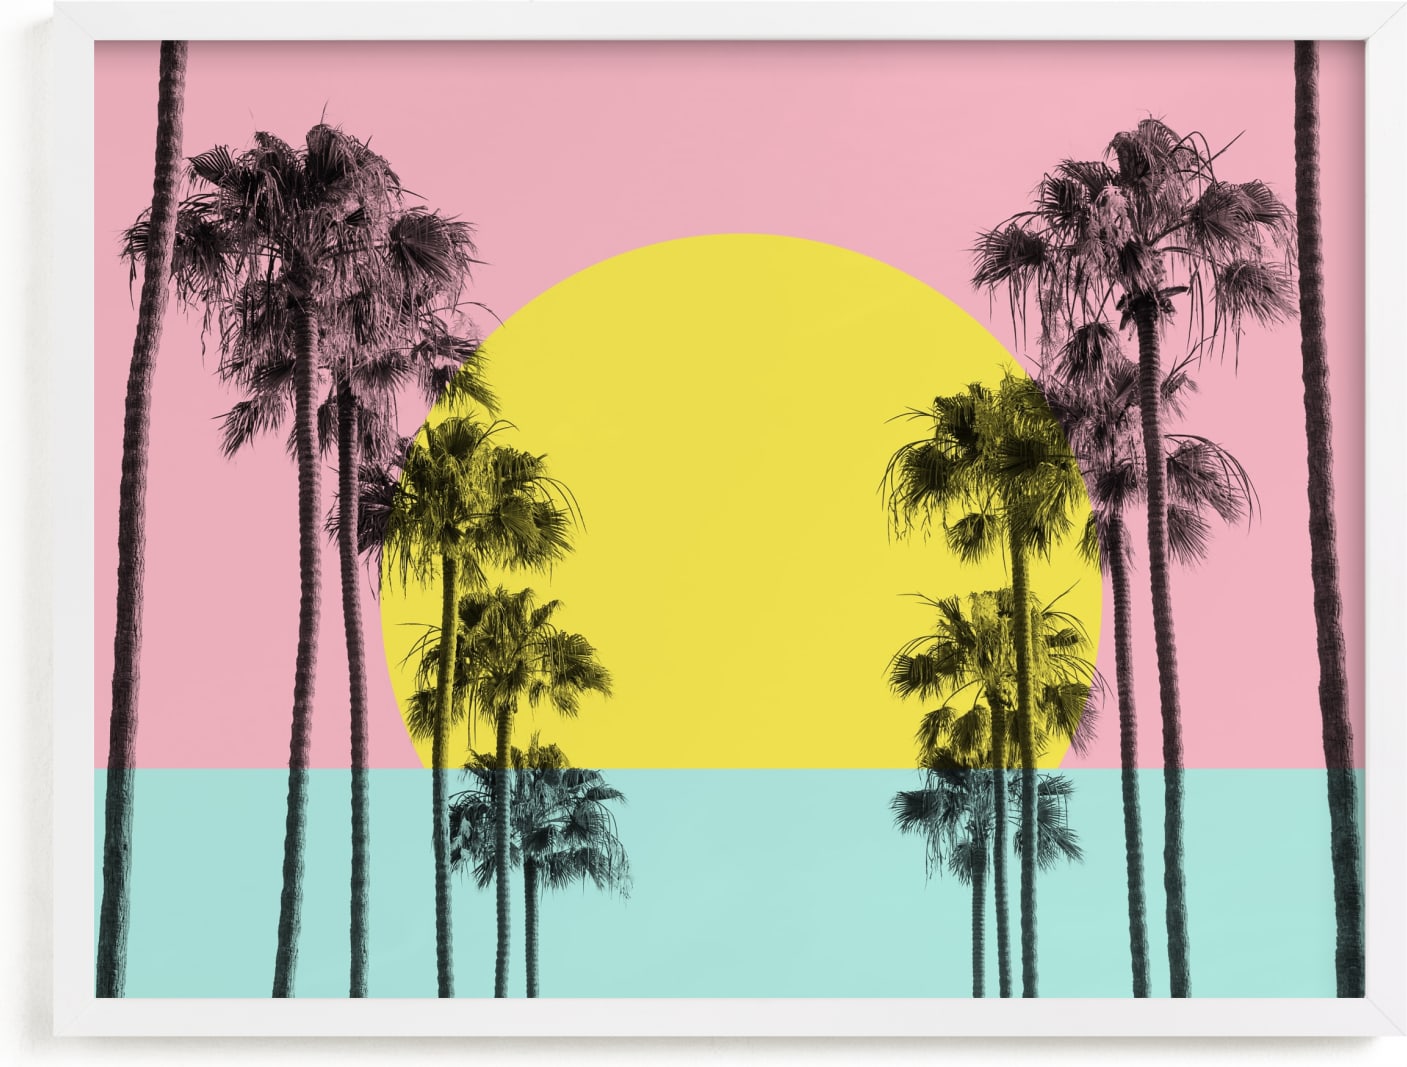 This is a colorful kids wall art by Jessica C Nugent called Summer Palms.